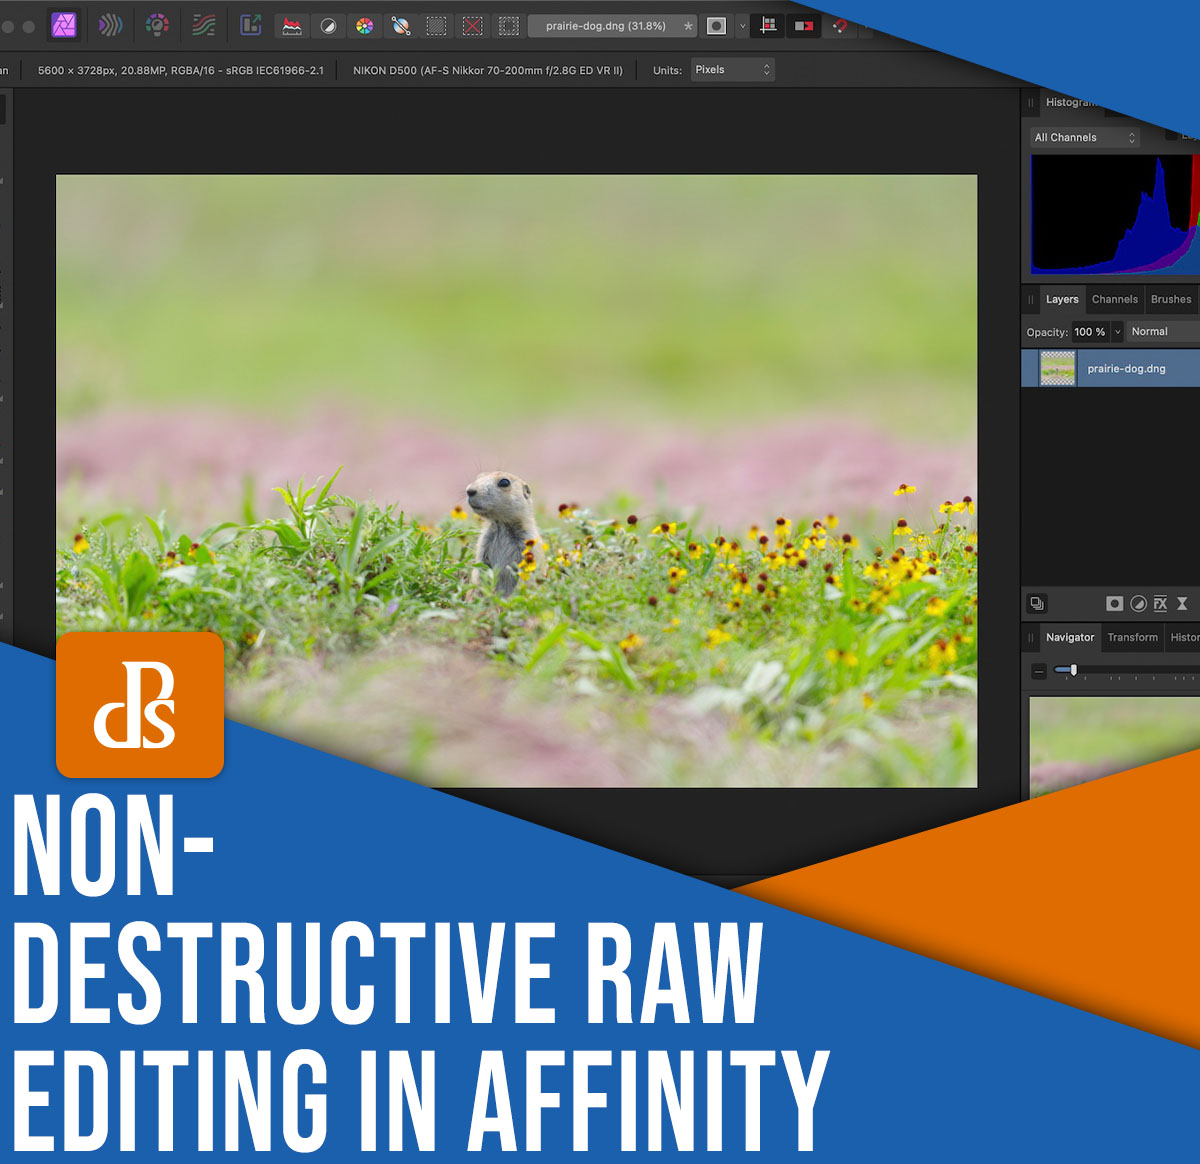 Non-destructive RAW editing in Affinity